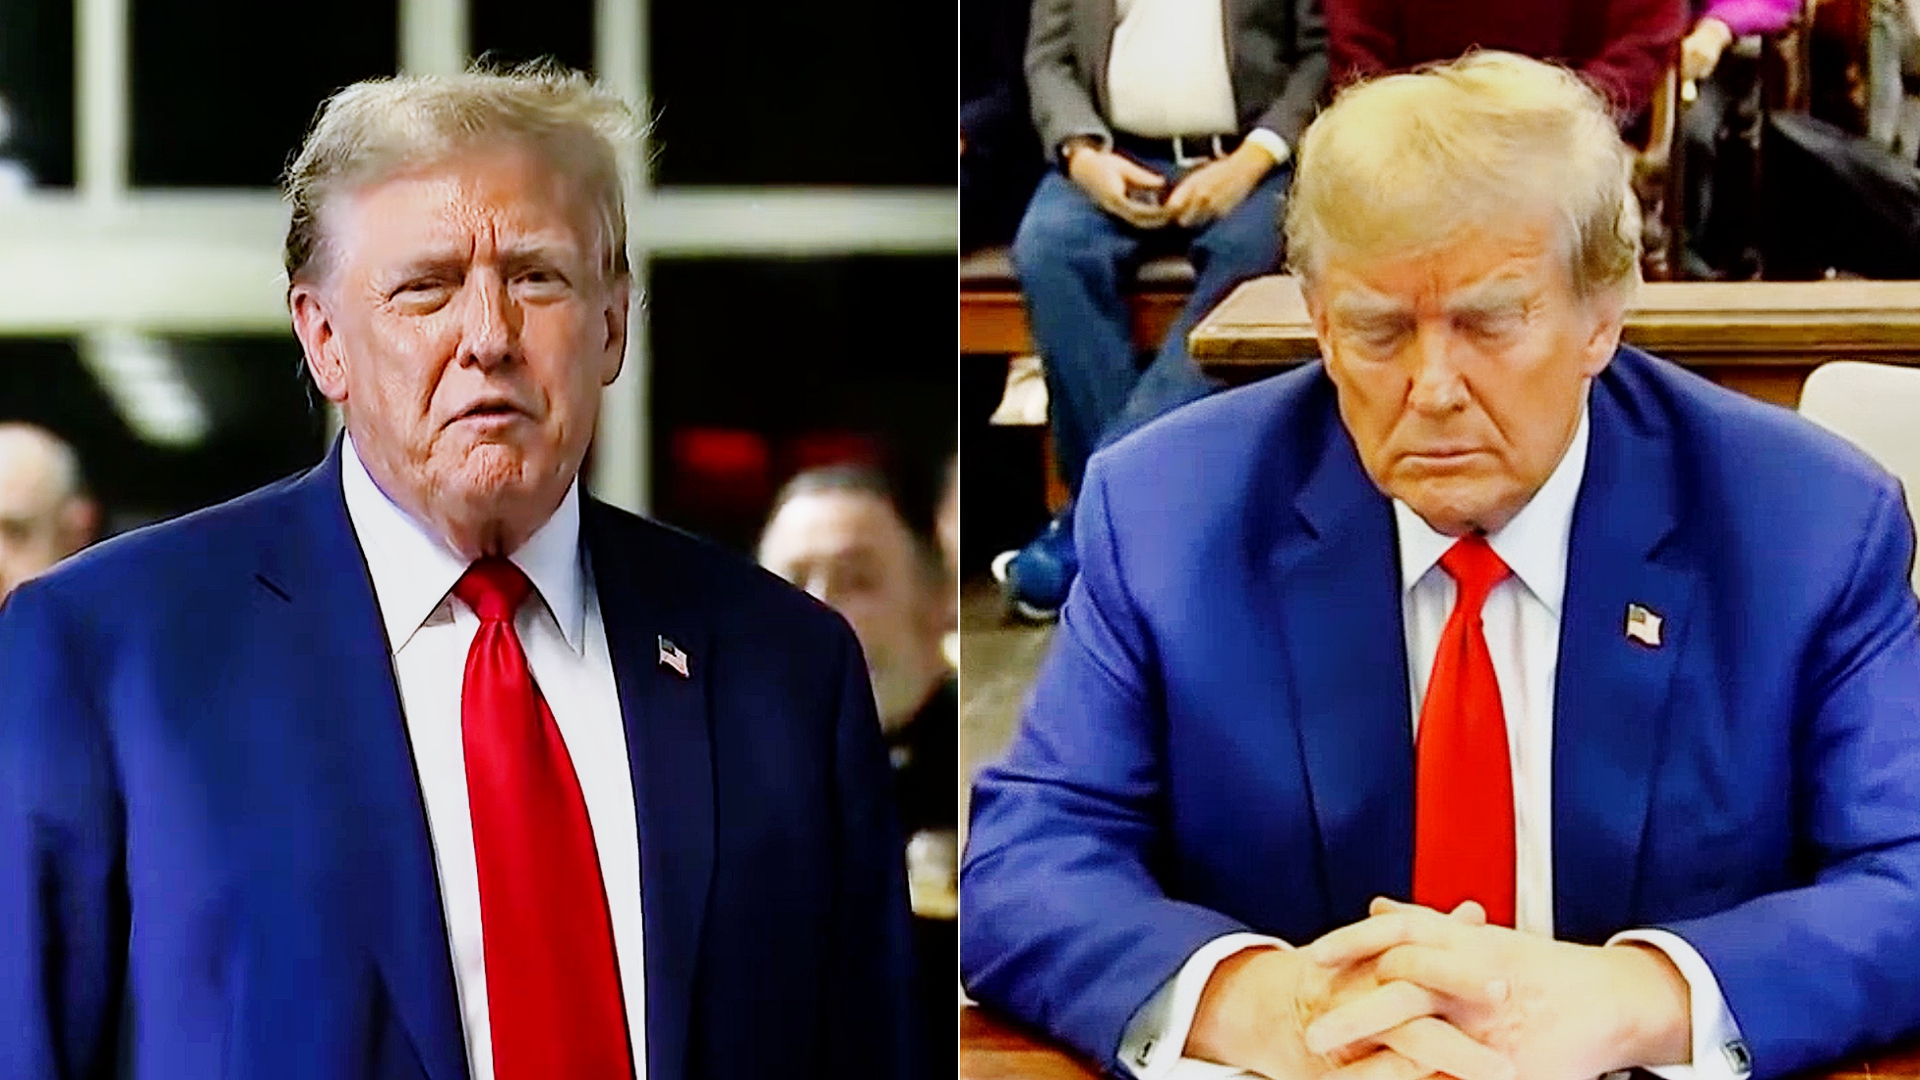 Trump Rages Against 'People On TV Lying And Spewing Hate' After He Was Caught Sleeping At Trial